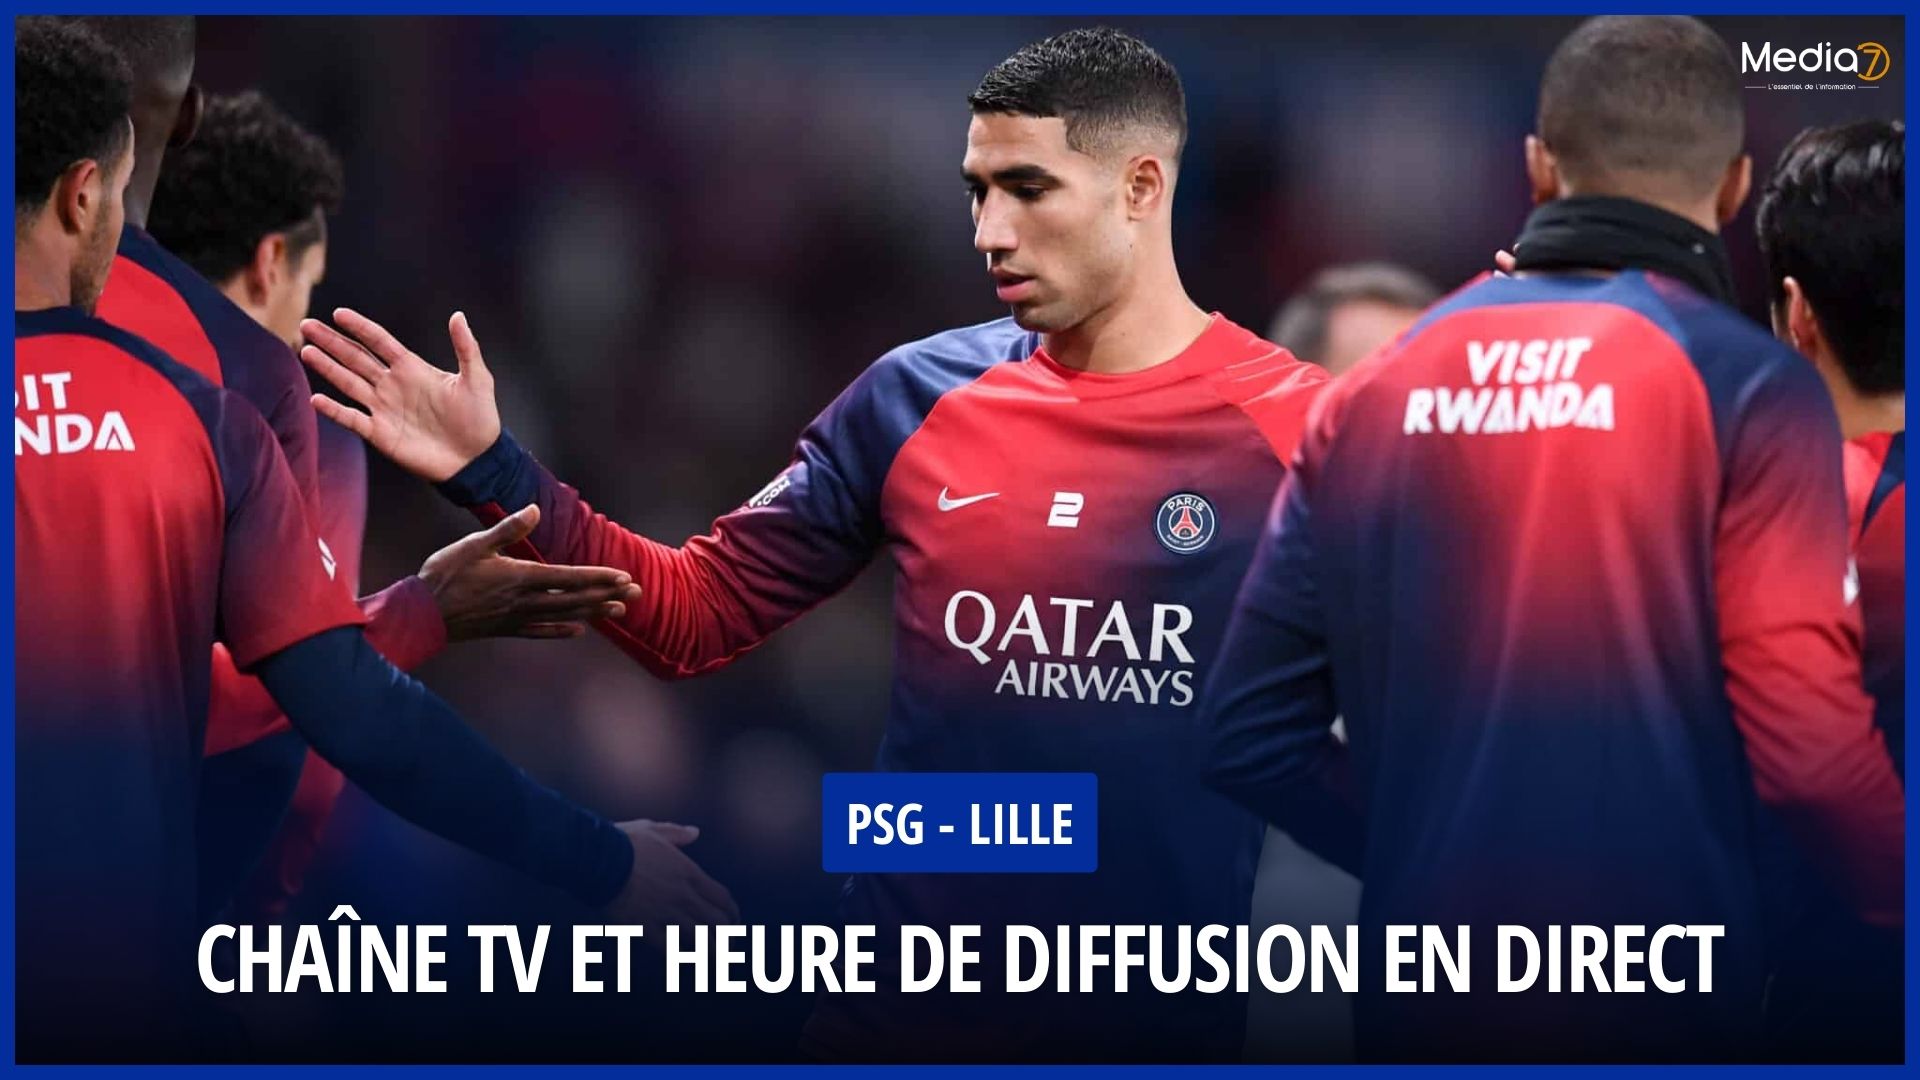 PSG - Lille Live Broadcast: TV & Streaming Channel, Time and More - Media7